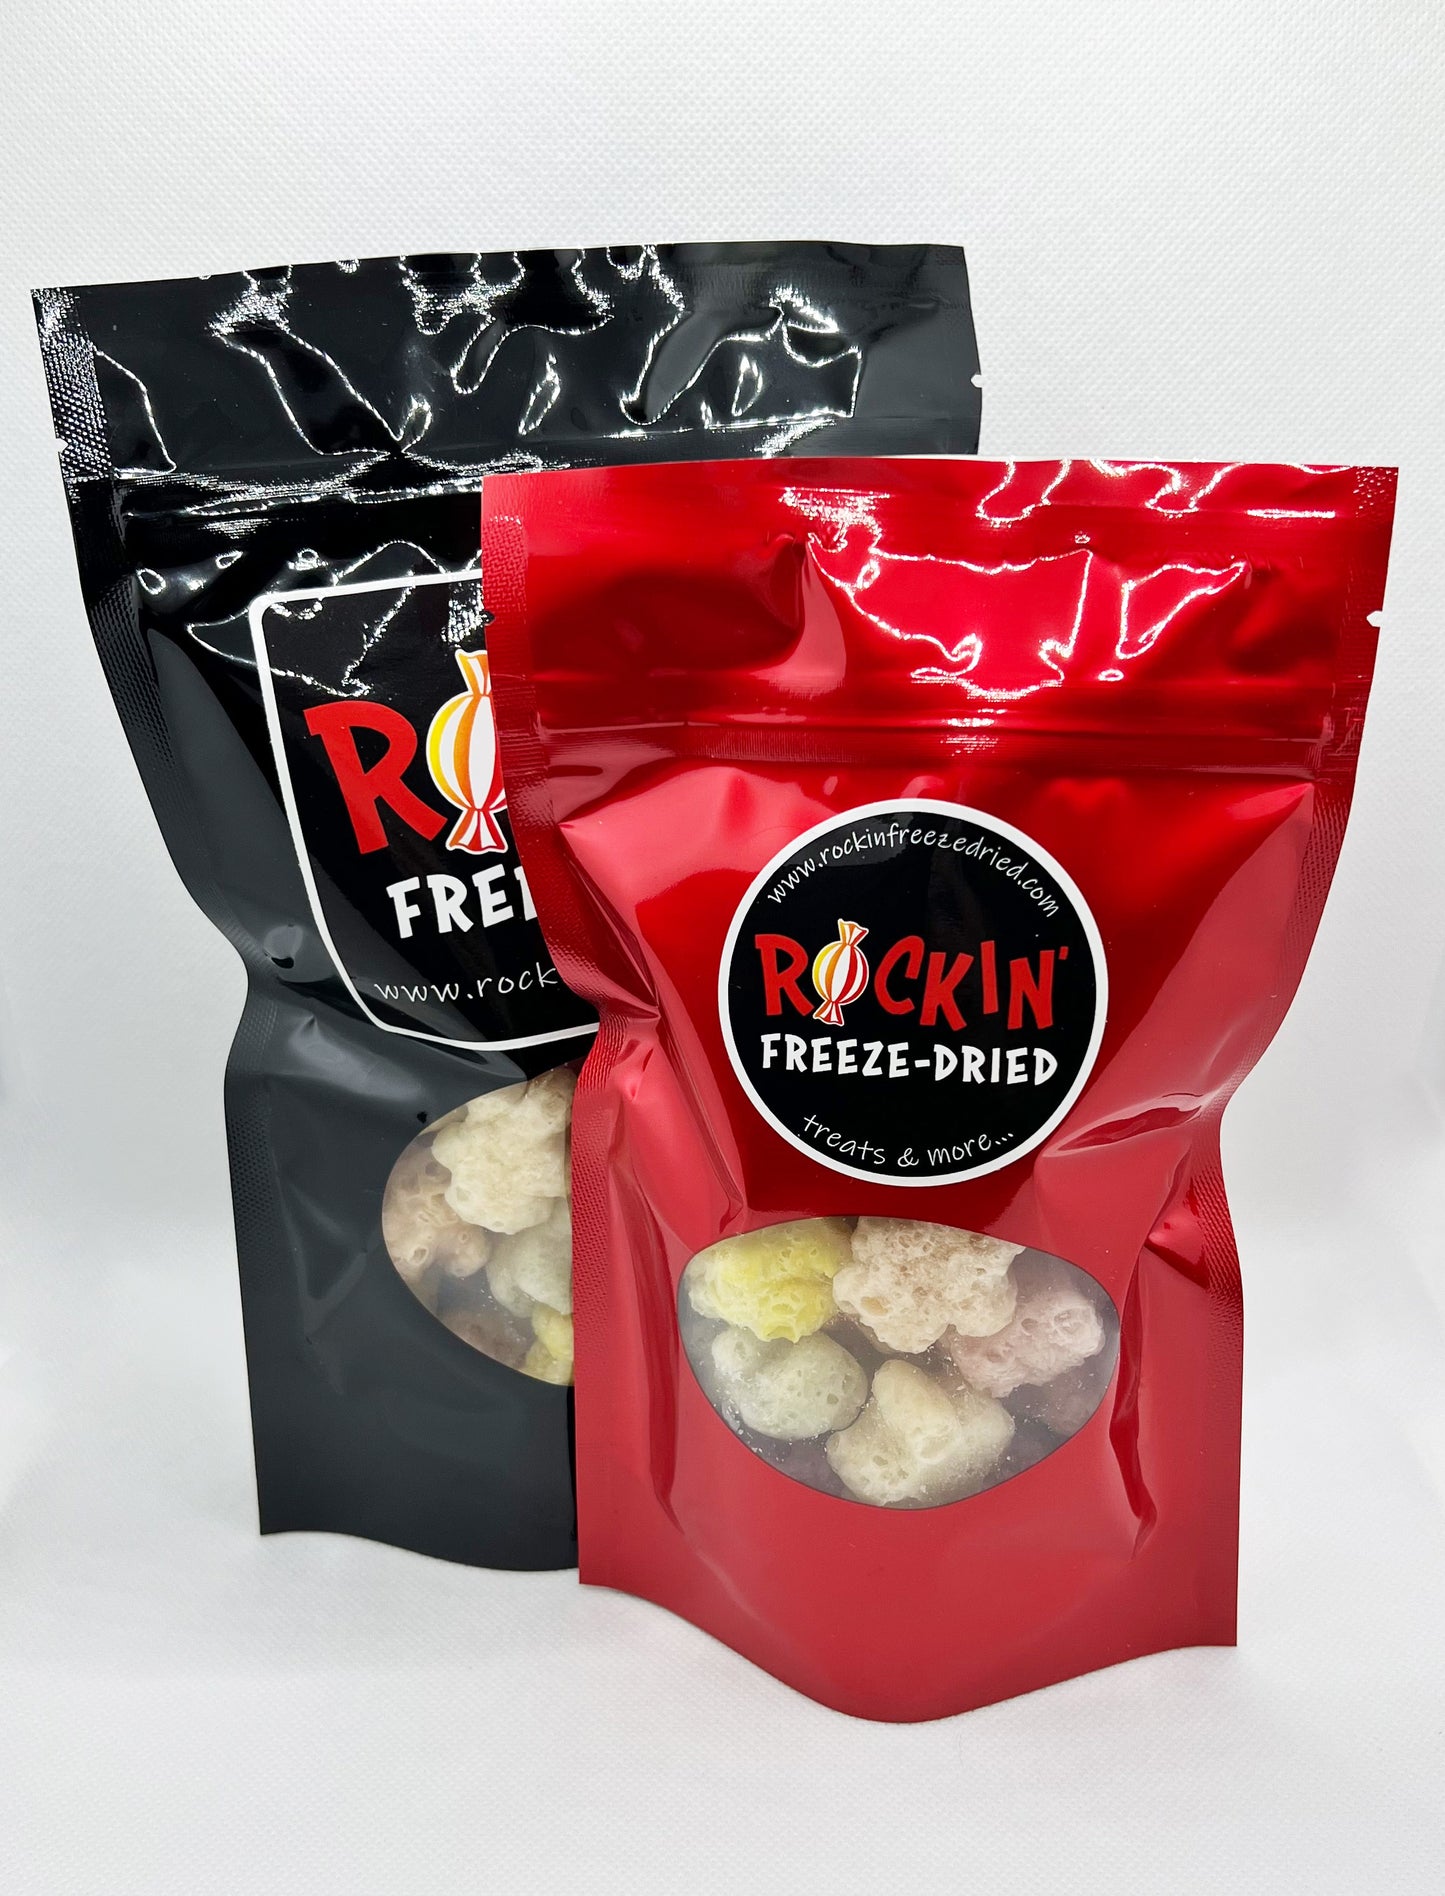 "(Let Me Be Your) Teddy Bear" Freeze-Dried Gummy Bears